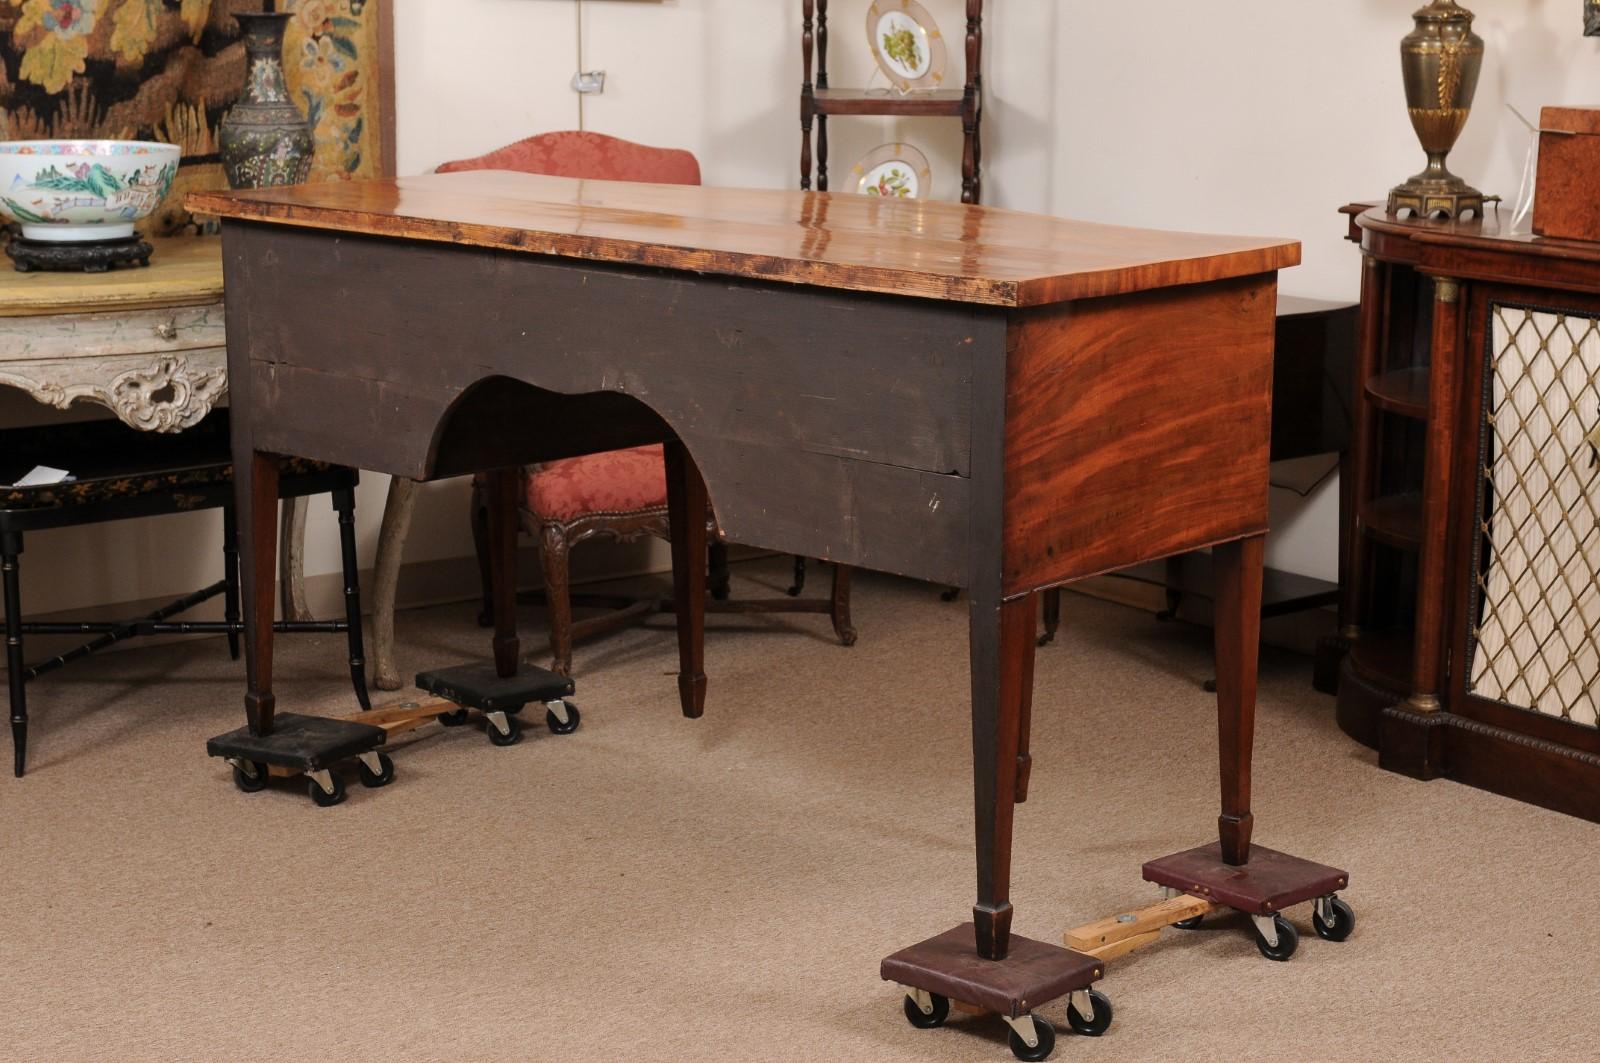 A late 18th century English George III figured mahogany serpentine sideboard with string, cross-banding and fan satin wood inlay ending tapered legs with spade feet.